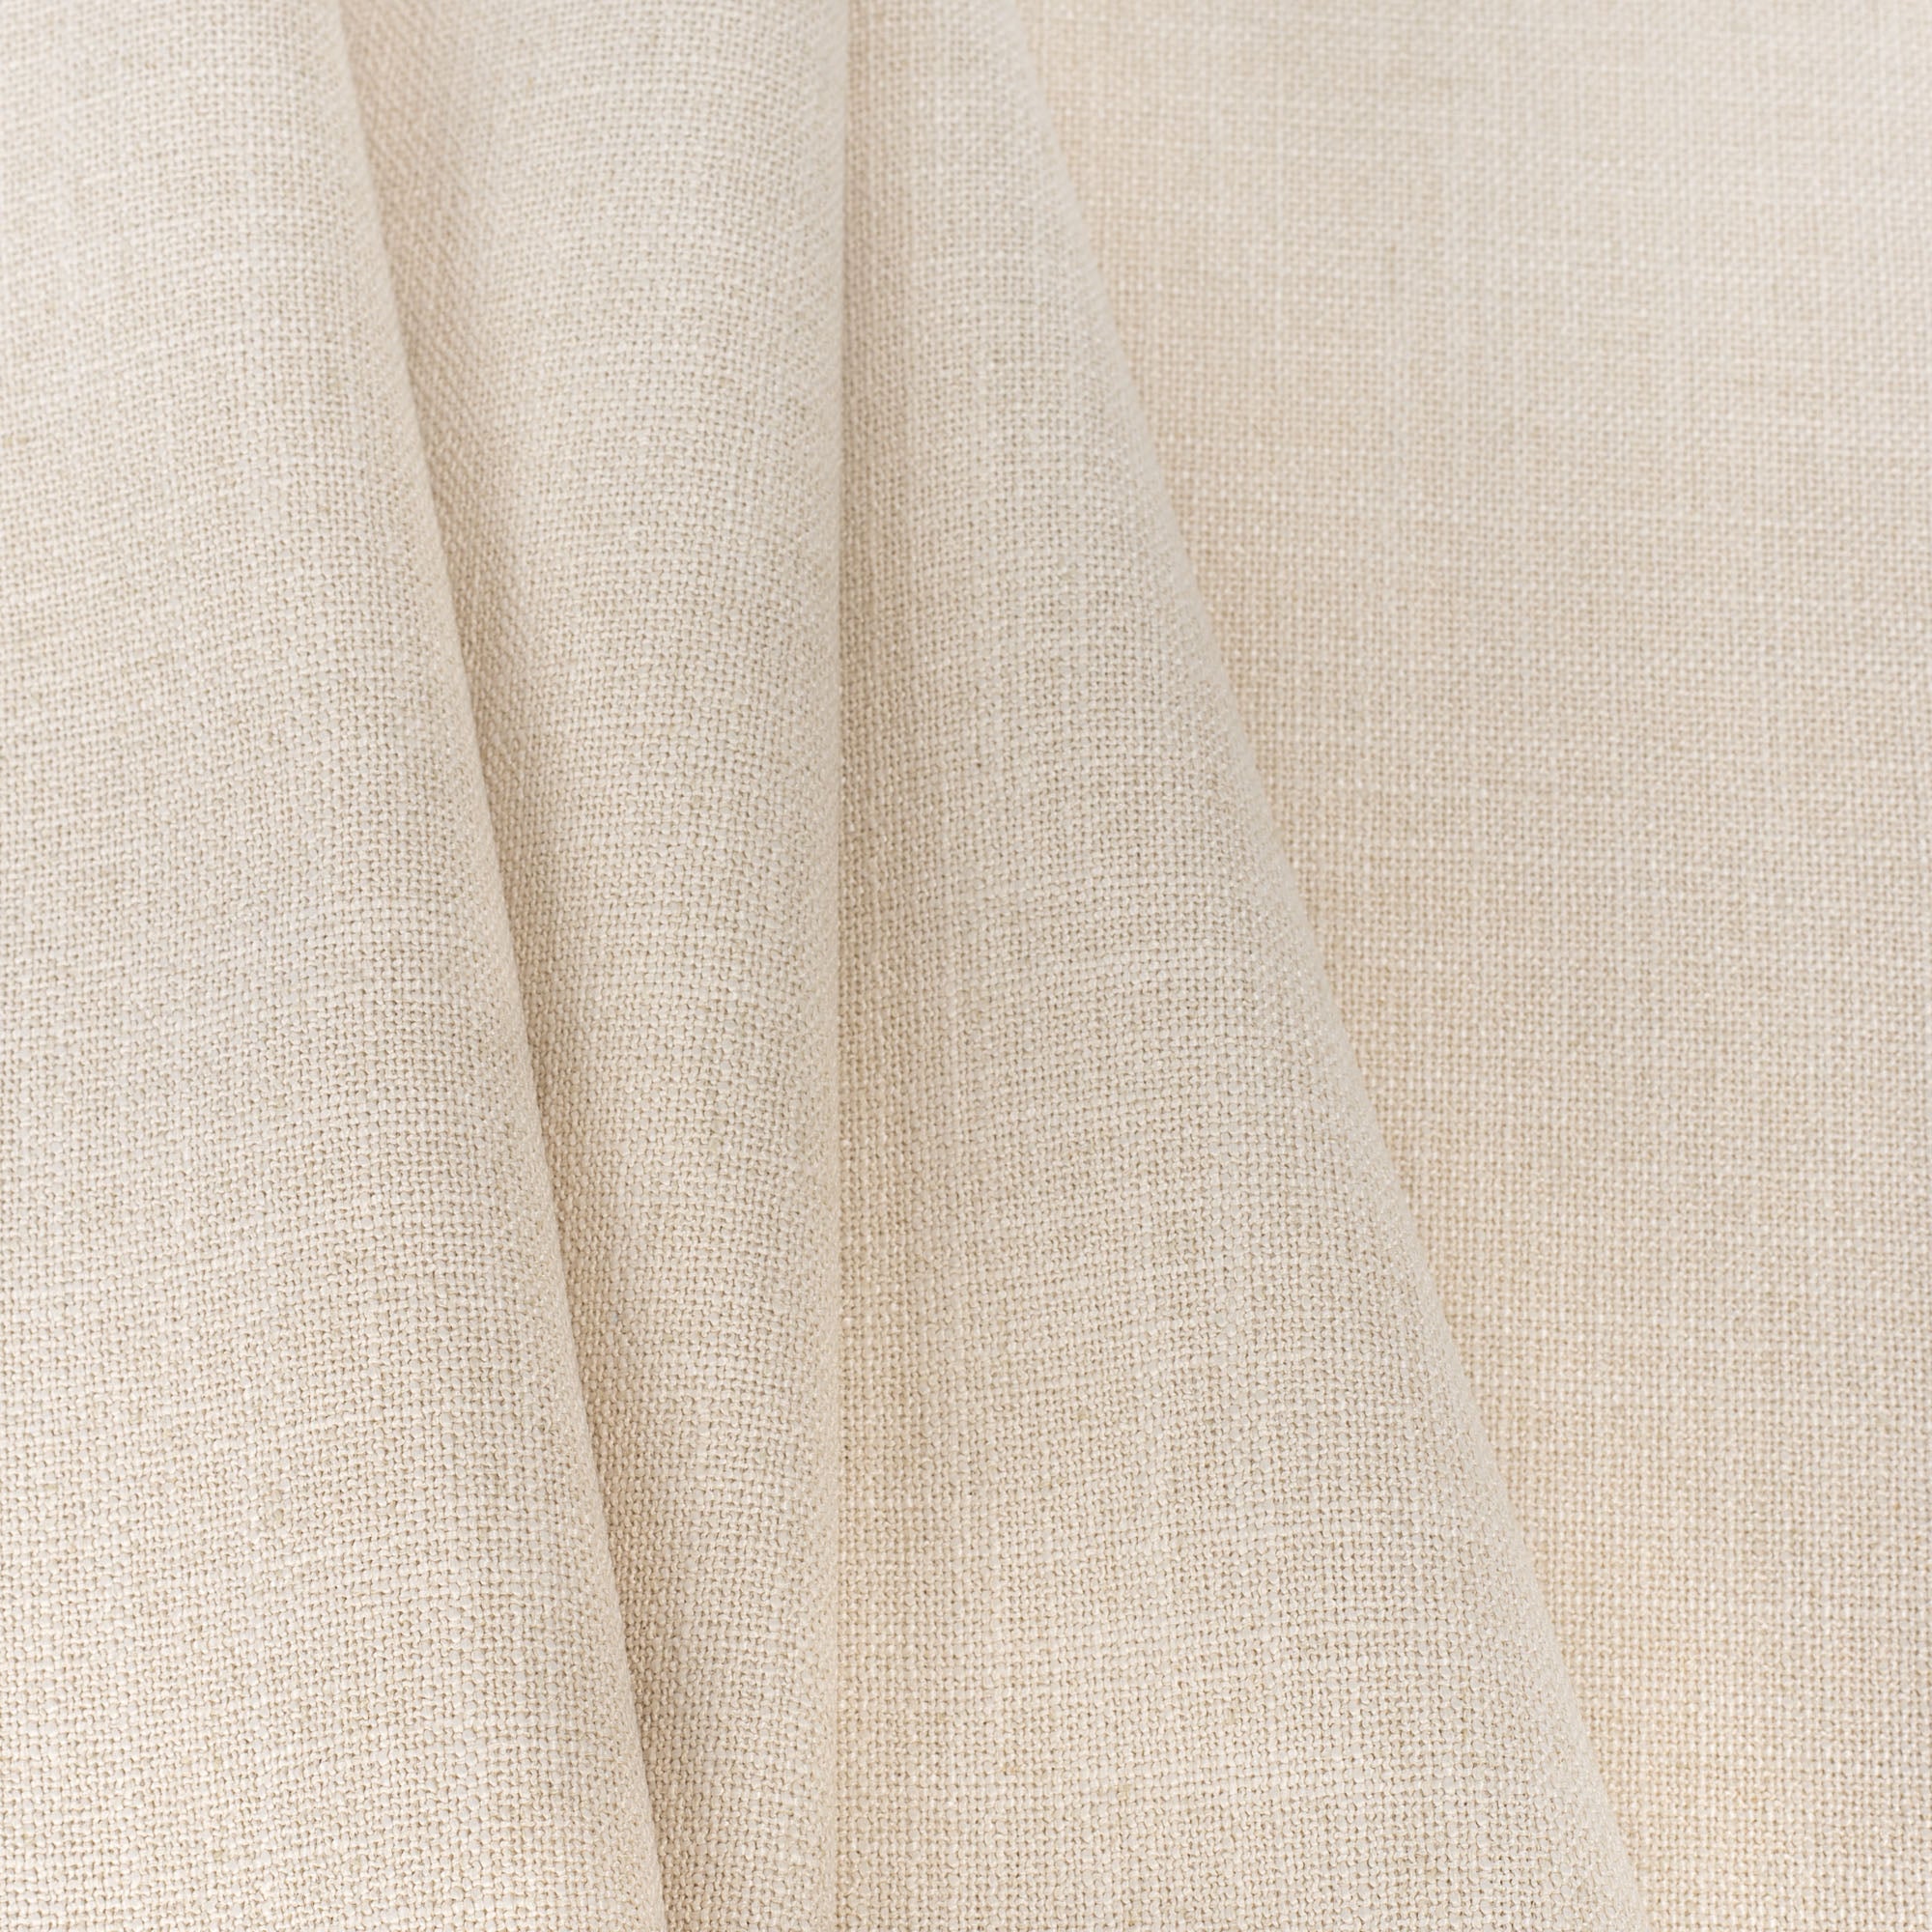 Grange Fabric Parchment, a high performance sandy beige upholstery fabric : close up view 